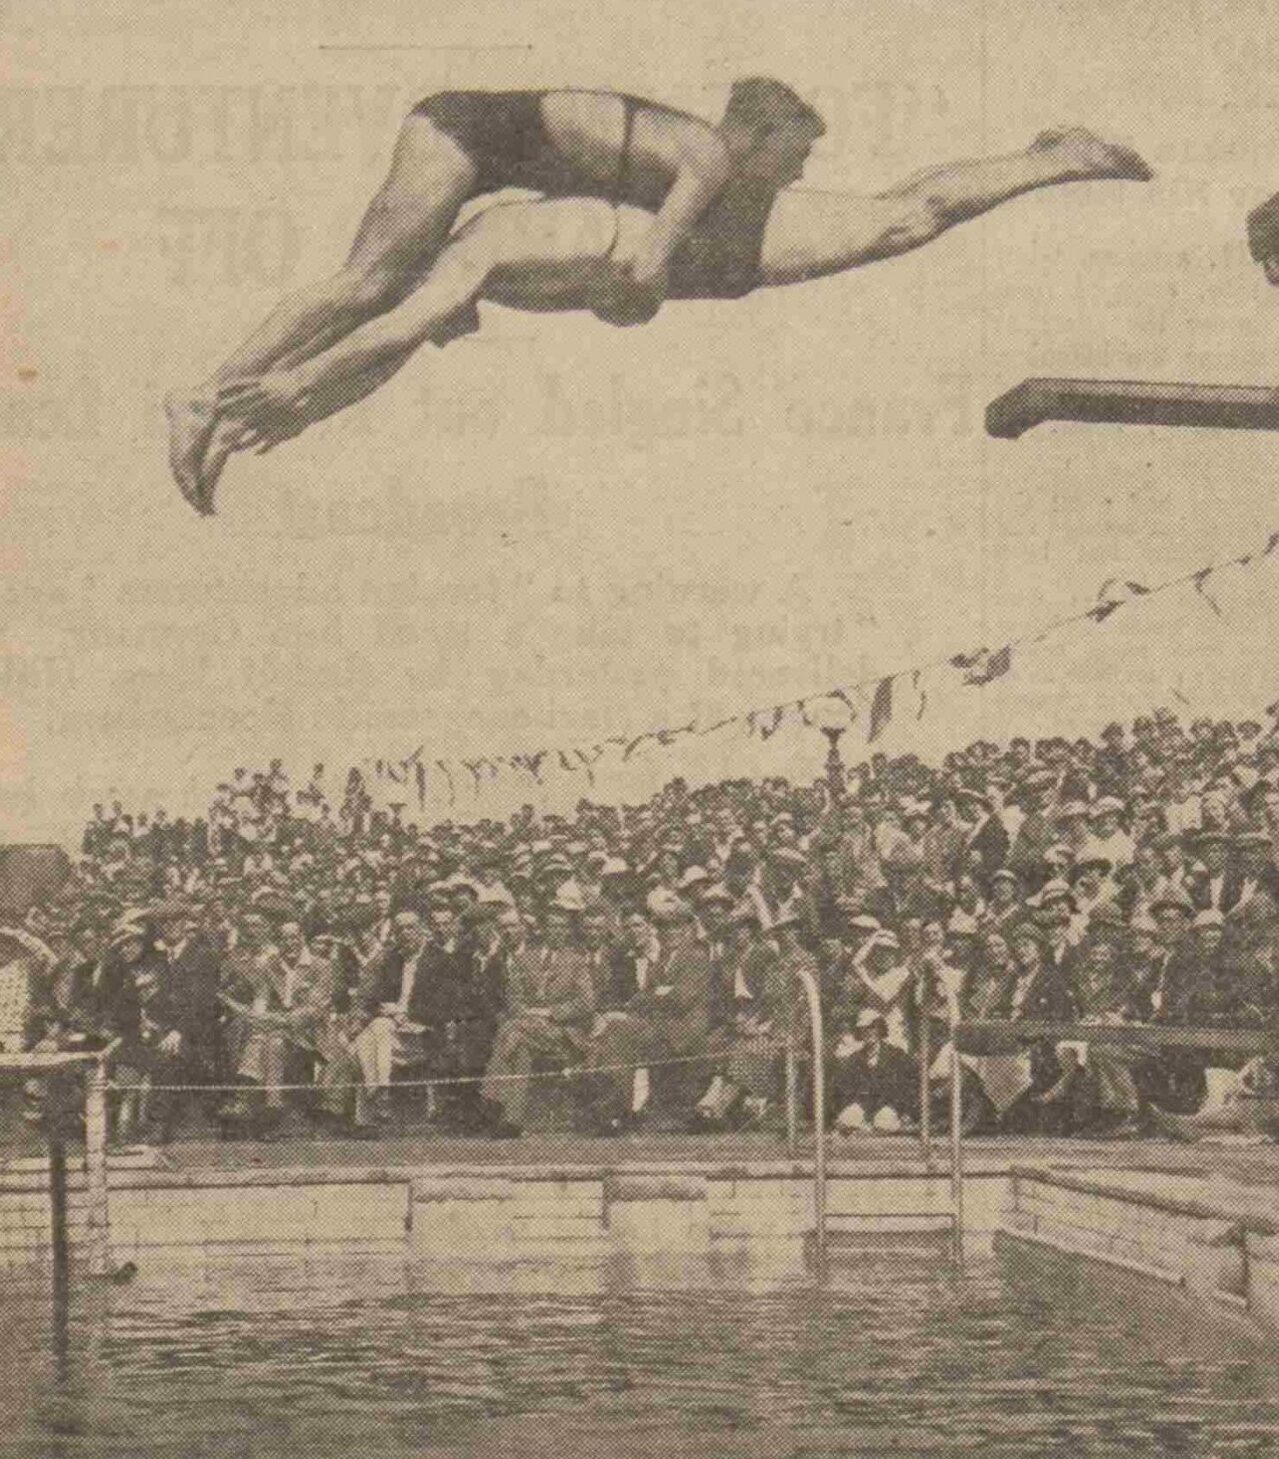 Two men in action as a diving exhibition takes place during the opening ceremony. Image: DC Thomson.